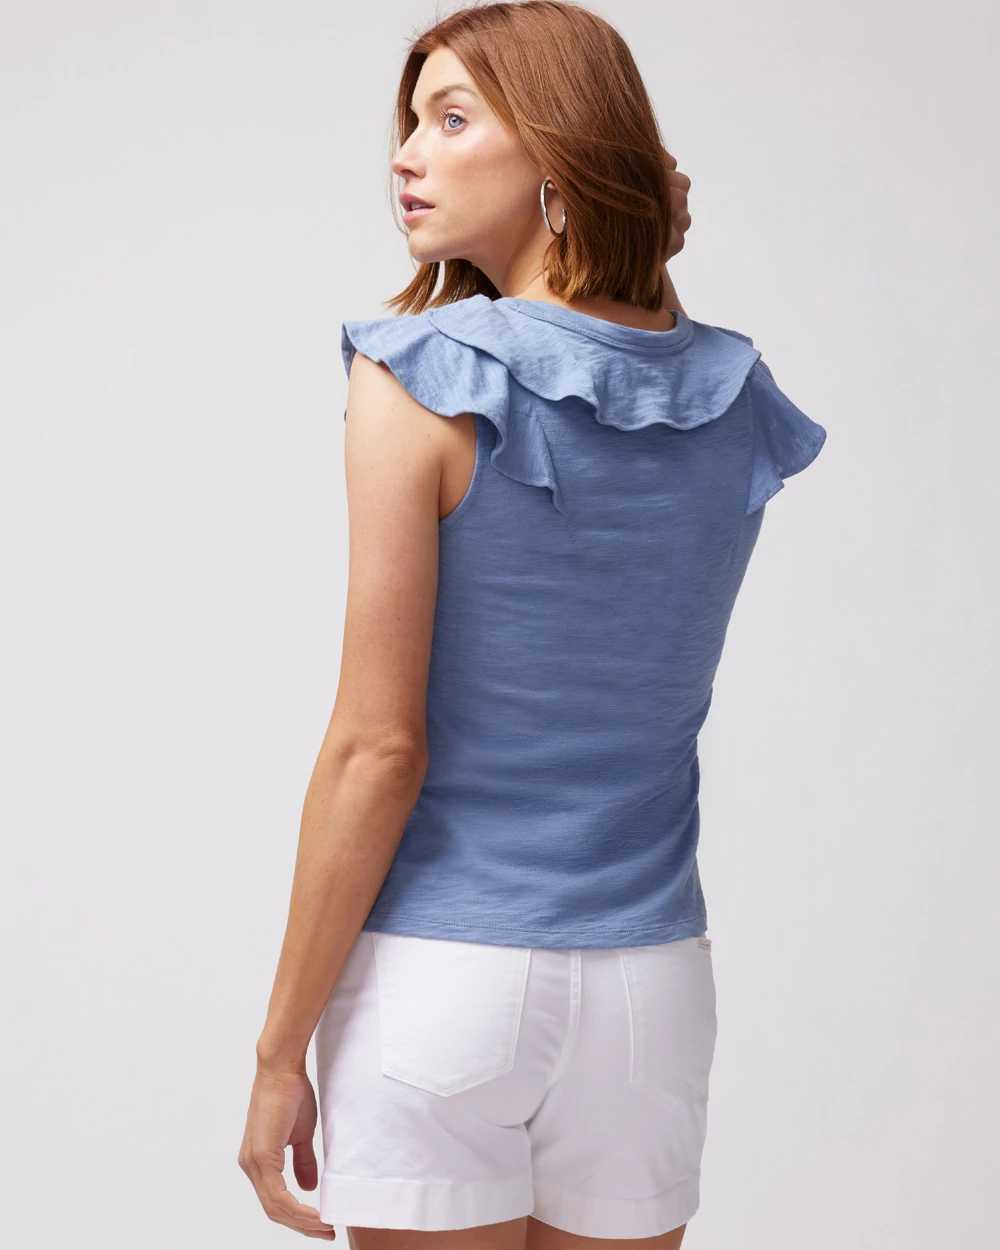 Ruffle Neck Tee click to view larger image.